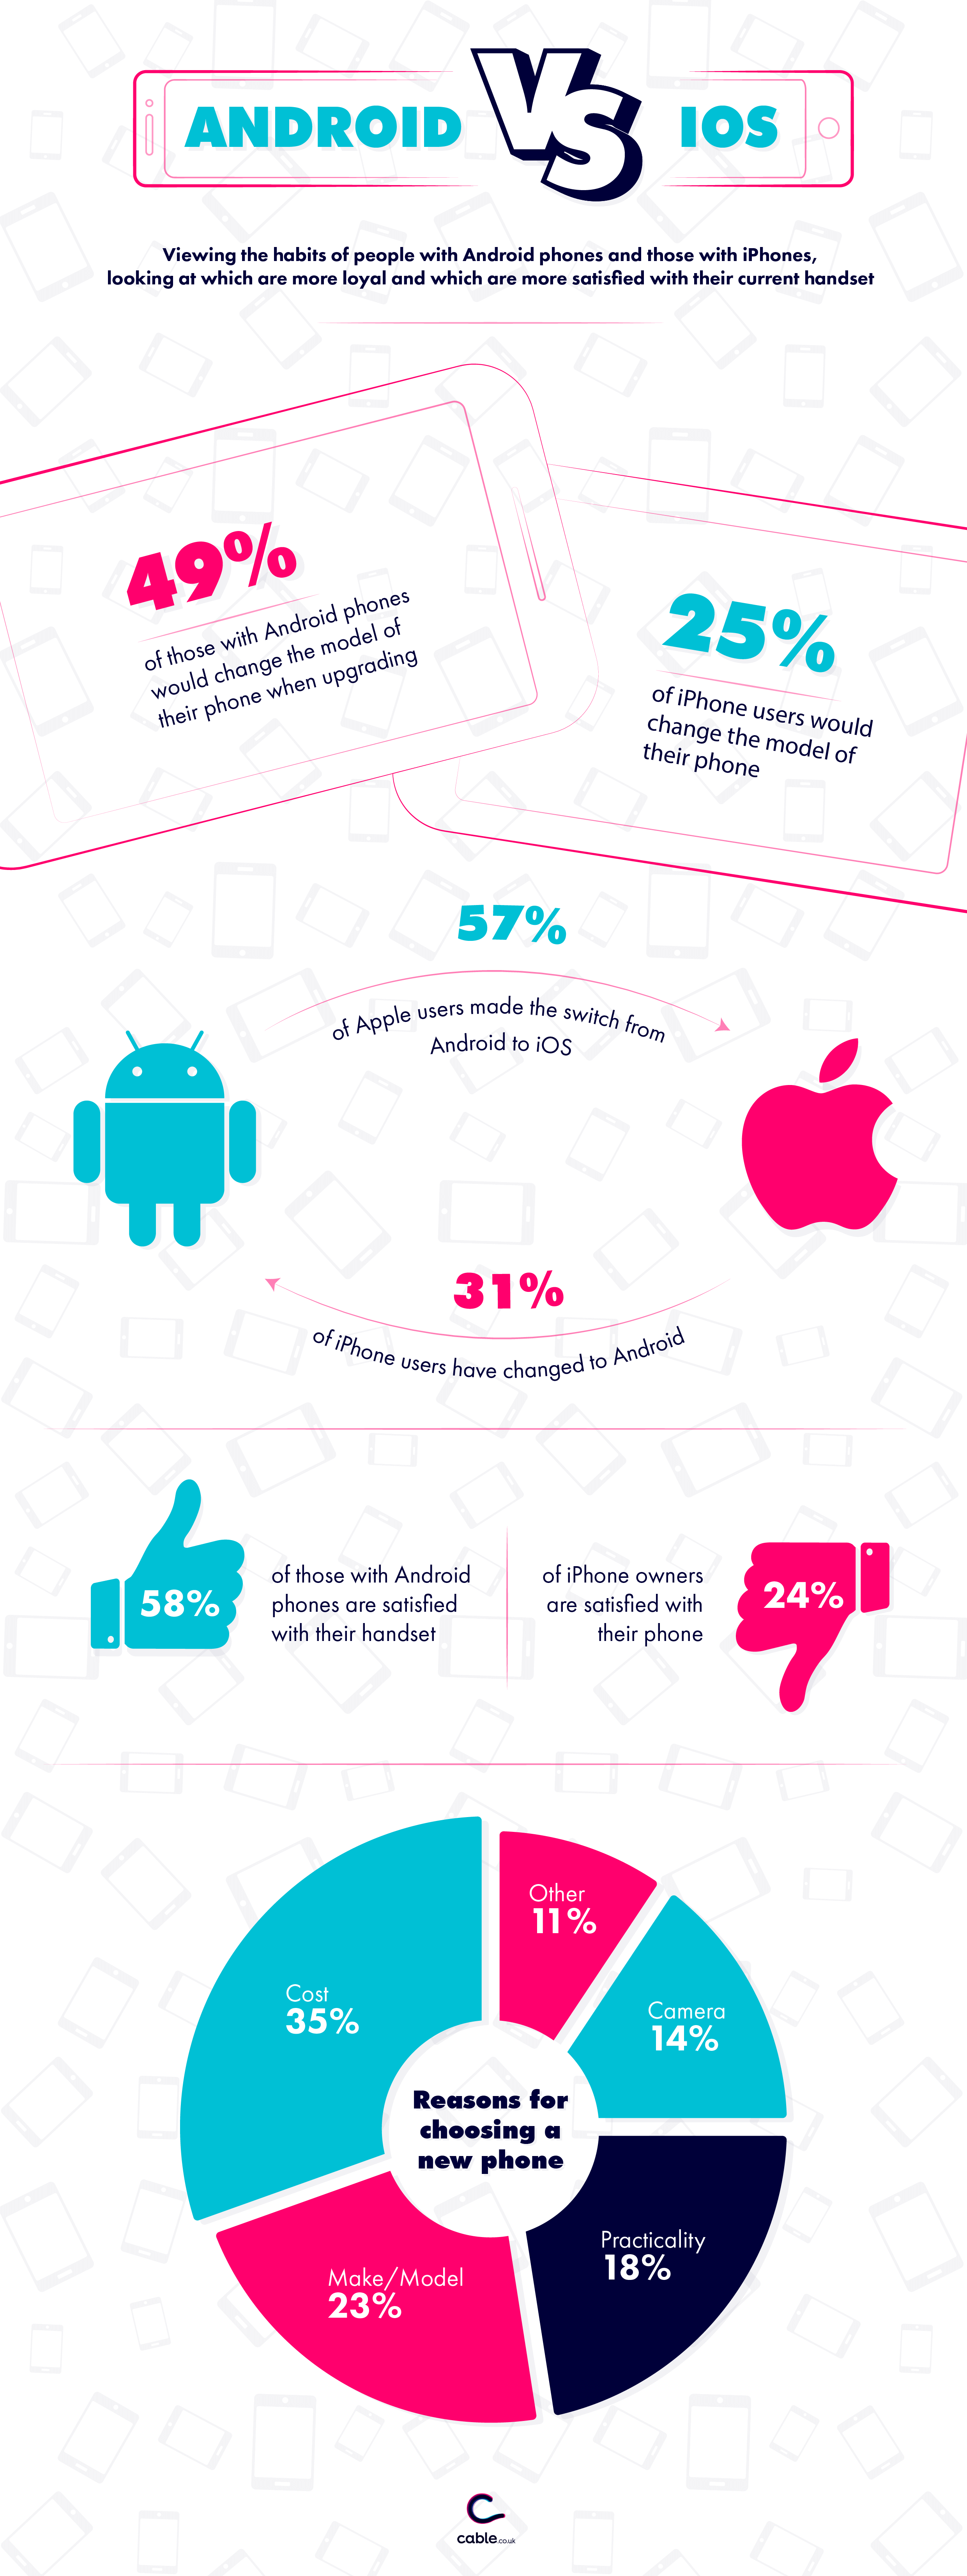 Android vs iOS infographic